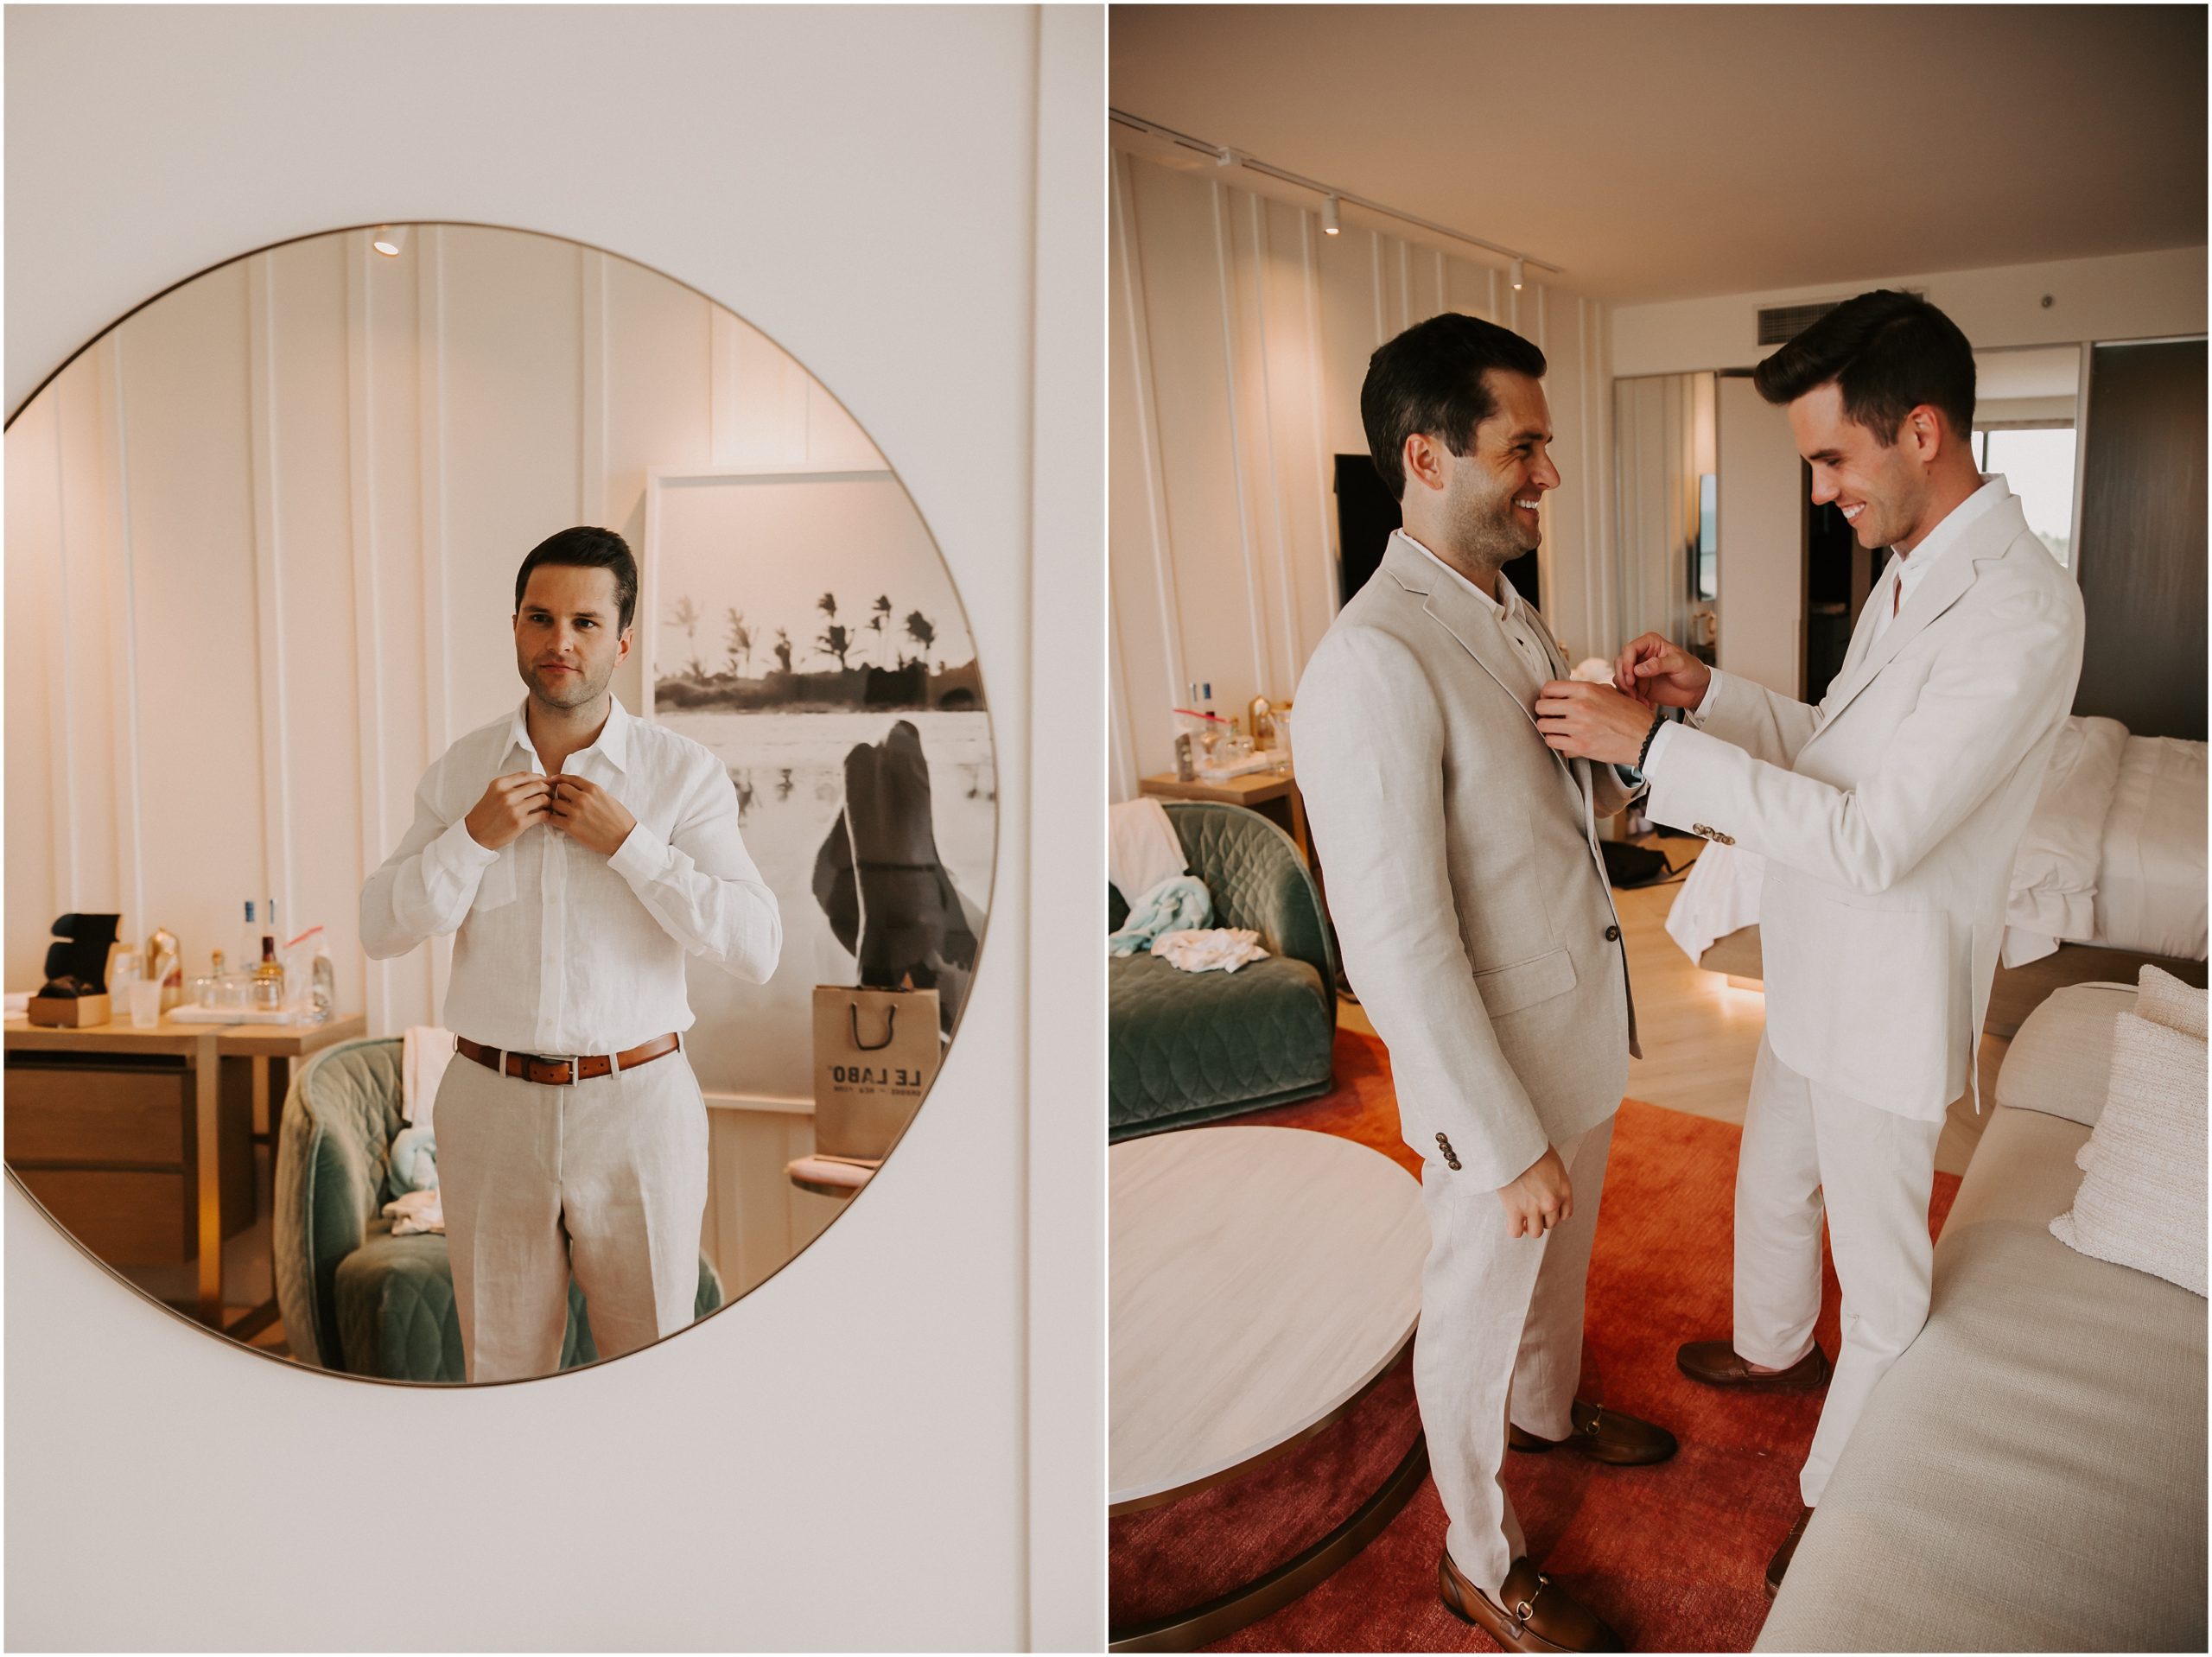 Corey and his brother opted for a light suit from Indochino and brown shoes, which paired perfectly with their Destination Wedding in Miami full of tropical beach vibes.